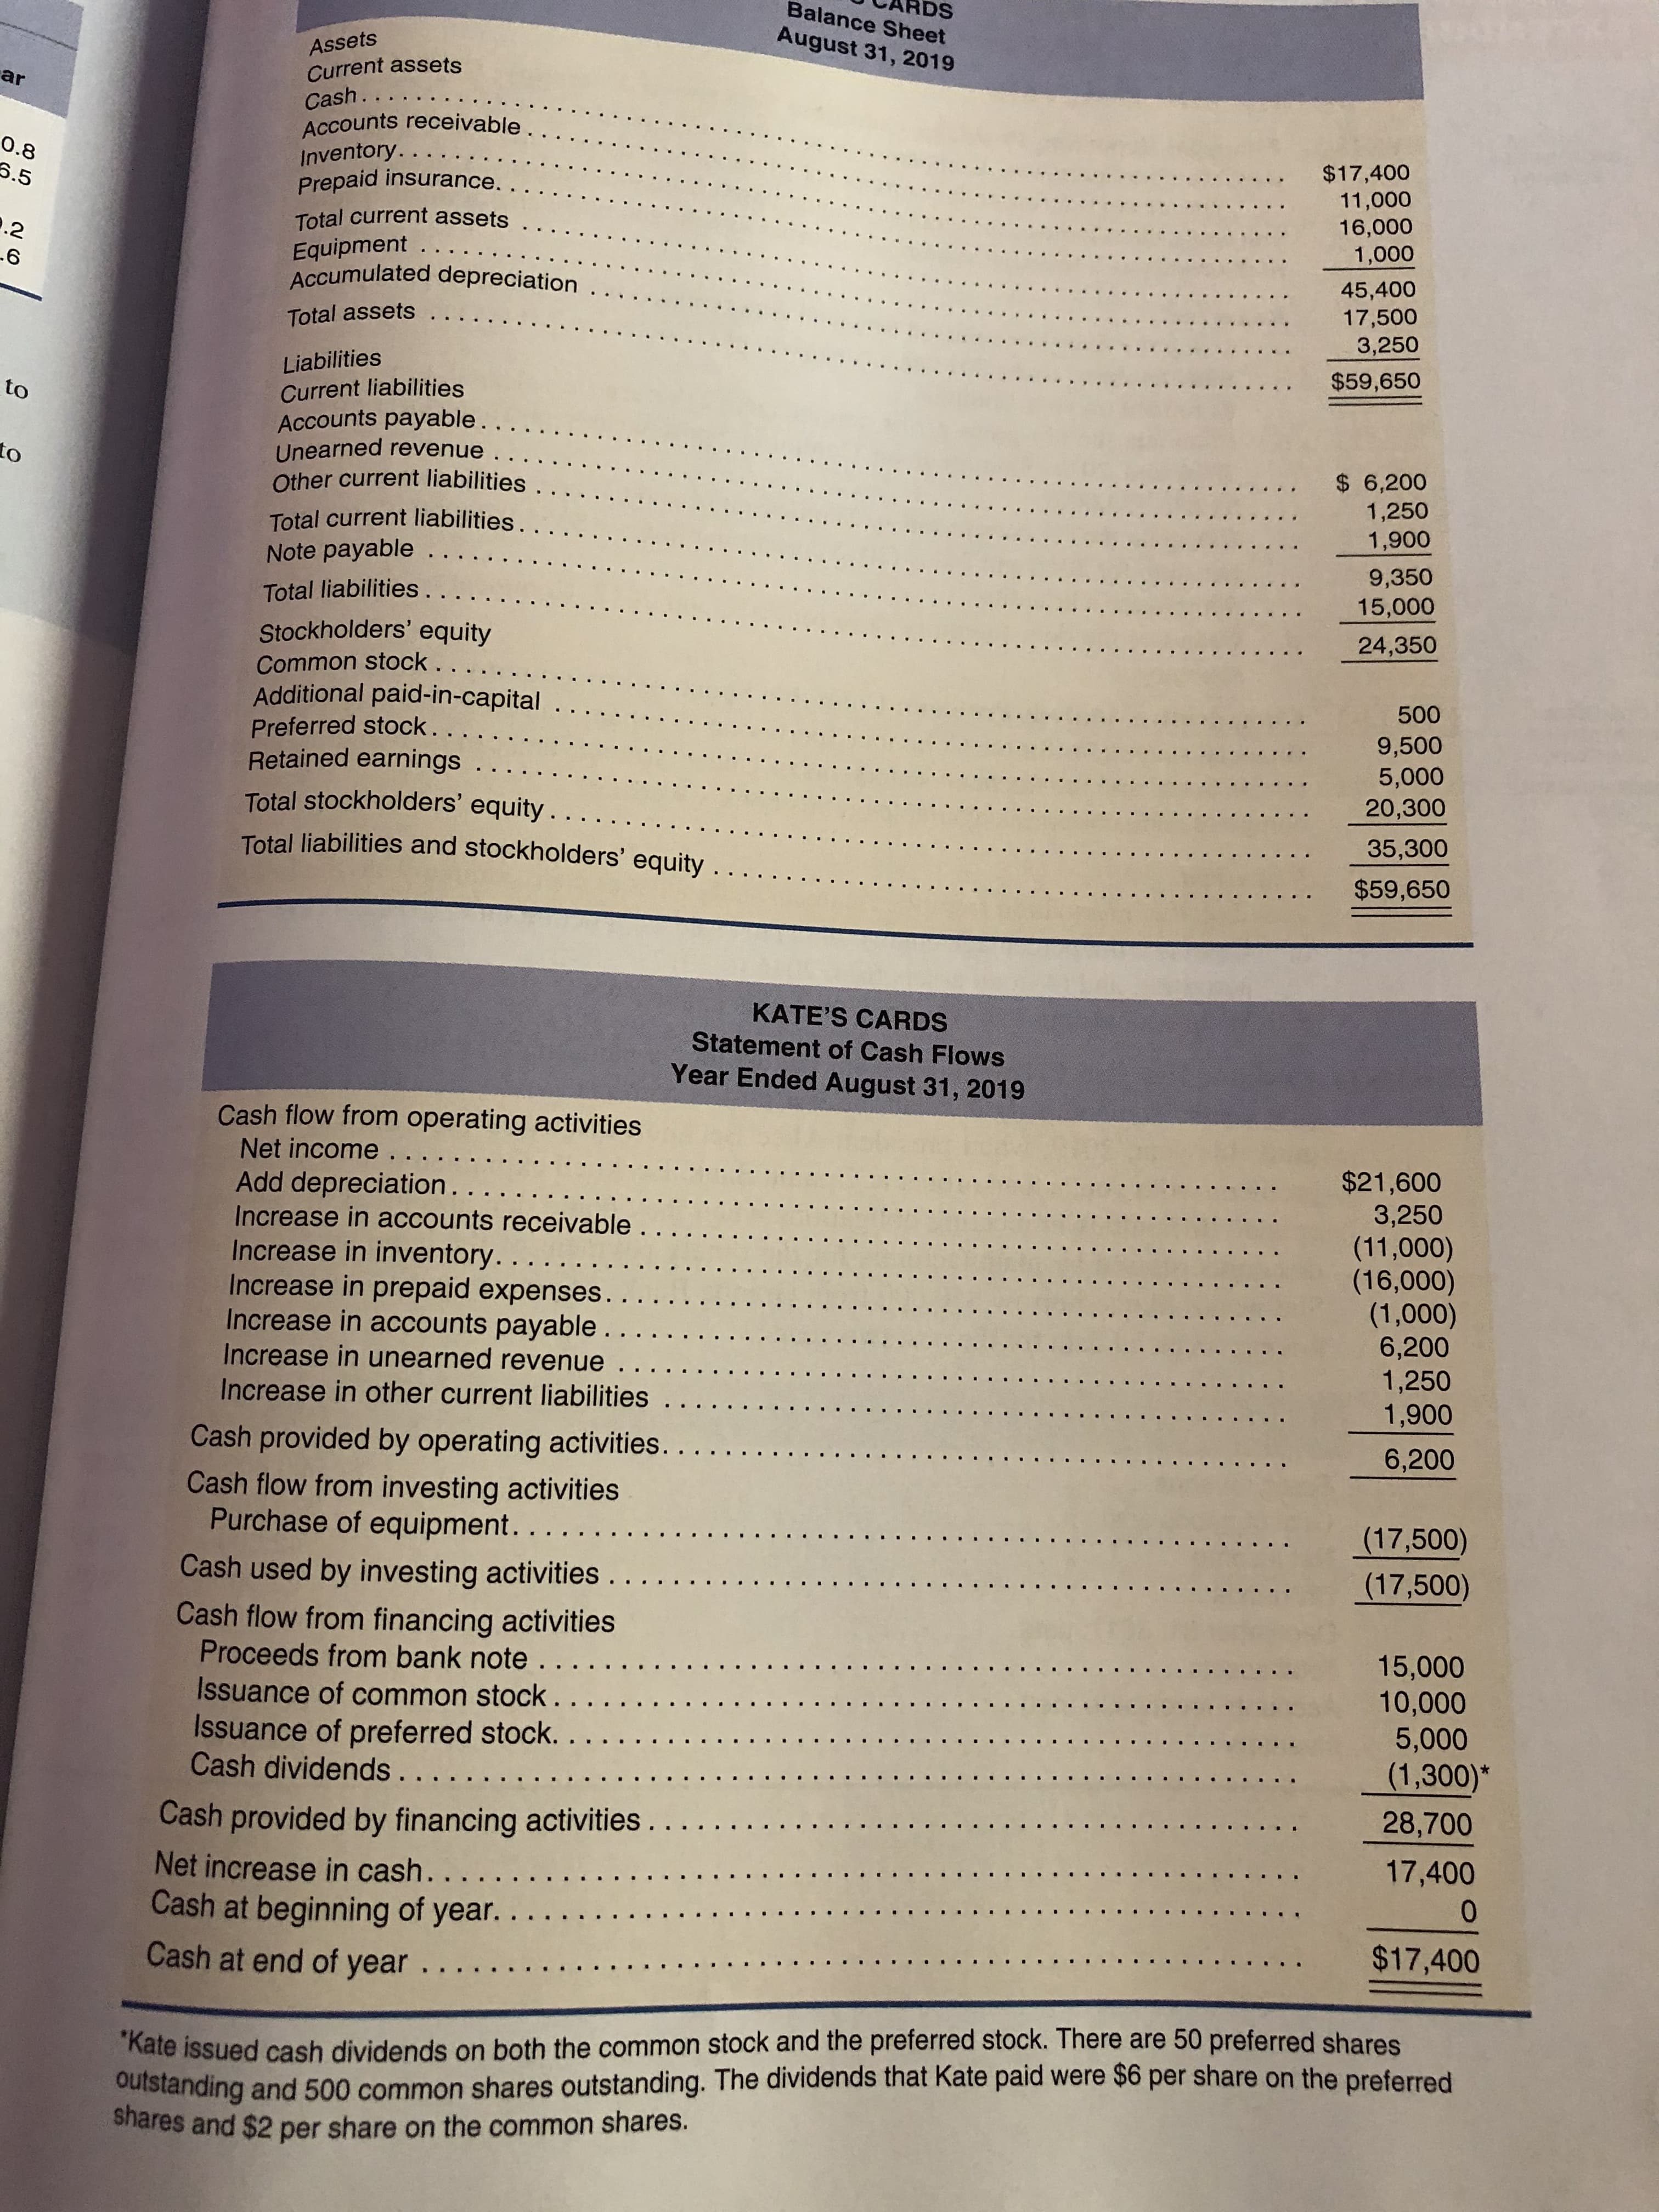 DS
Balance Sheet
August 31, 2019
Assets
Current assets
Cash..
Accounts receivable..
ar
Inventory. .
Prepaid insurance. ..
Total current assets .
Equipment ... . .
Accumulated depreciation .
$17,400
11,000
O.8
6.5
16,000
.2
6
1,000
45,400
17,500
Total assets .
3,250
Liabilities
Current liabilities
Accounts payable...
Unearned revenue .
Other current liabilities..
$59,650
to
to
6,200
1,250
1,900
Total current liabilities. .
Note payable
9,350
15,000
Total liabilities.
24,350
Stockholders' equity
Common stock.. . .
Additional paid-in-capital
Preferred stock. . .
Retained earnings.
Total stockholders' equity. ...
Total liabilities and stockholders' equity
500
9,500
5,000
20,300
35,300
$59,650
KATE'S CARDS
Statement of Cash Flows
Year Ended August 31, 2019
Cash flow from operating activities
Net income ..
Add depreciation. ..
Increase in accounts receivable. . .
Increase in inventory. . . .
Increase in prepaid expenses. . .
Increase in accounts payable. . .
Increase in unearned revenue
$21,600
3,250
(11,000)
(16,000)
(1,000)
6,200
1,250
1,900
Increase in other current liabilities
Cash provided by operating activities.. . ..
Cash flow from investing activities
Purchase of equipment...
6,200
(17,500)
(17,500)
Cash used by investing activities....
Cash flow from financing activities
Proceeds from bank note . . .
Issuance of common stock. ..
Issuance of preferred stock. . . .
Cash dividends. . . . .
15,000
10,000
5,000
(1,300)*
28,700
Cash provided by financing activities... ..
Net increase in cash.....
Cash at beginning of year. . ..
Cash at end of year . . .
17,400
0
$17,400
"Kate issued cash dividends on both the common stock and the preferred stock. There are 50 preferred shares
outstanding and 500 common shares outstanding. The dividends that Kate paid were $6 per share on the preferred
shares and $2 per share on the common shares.
